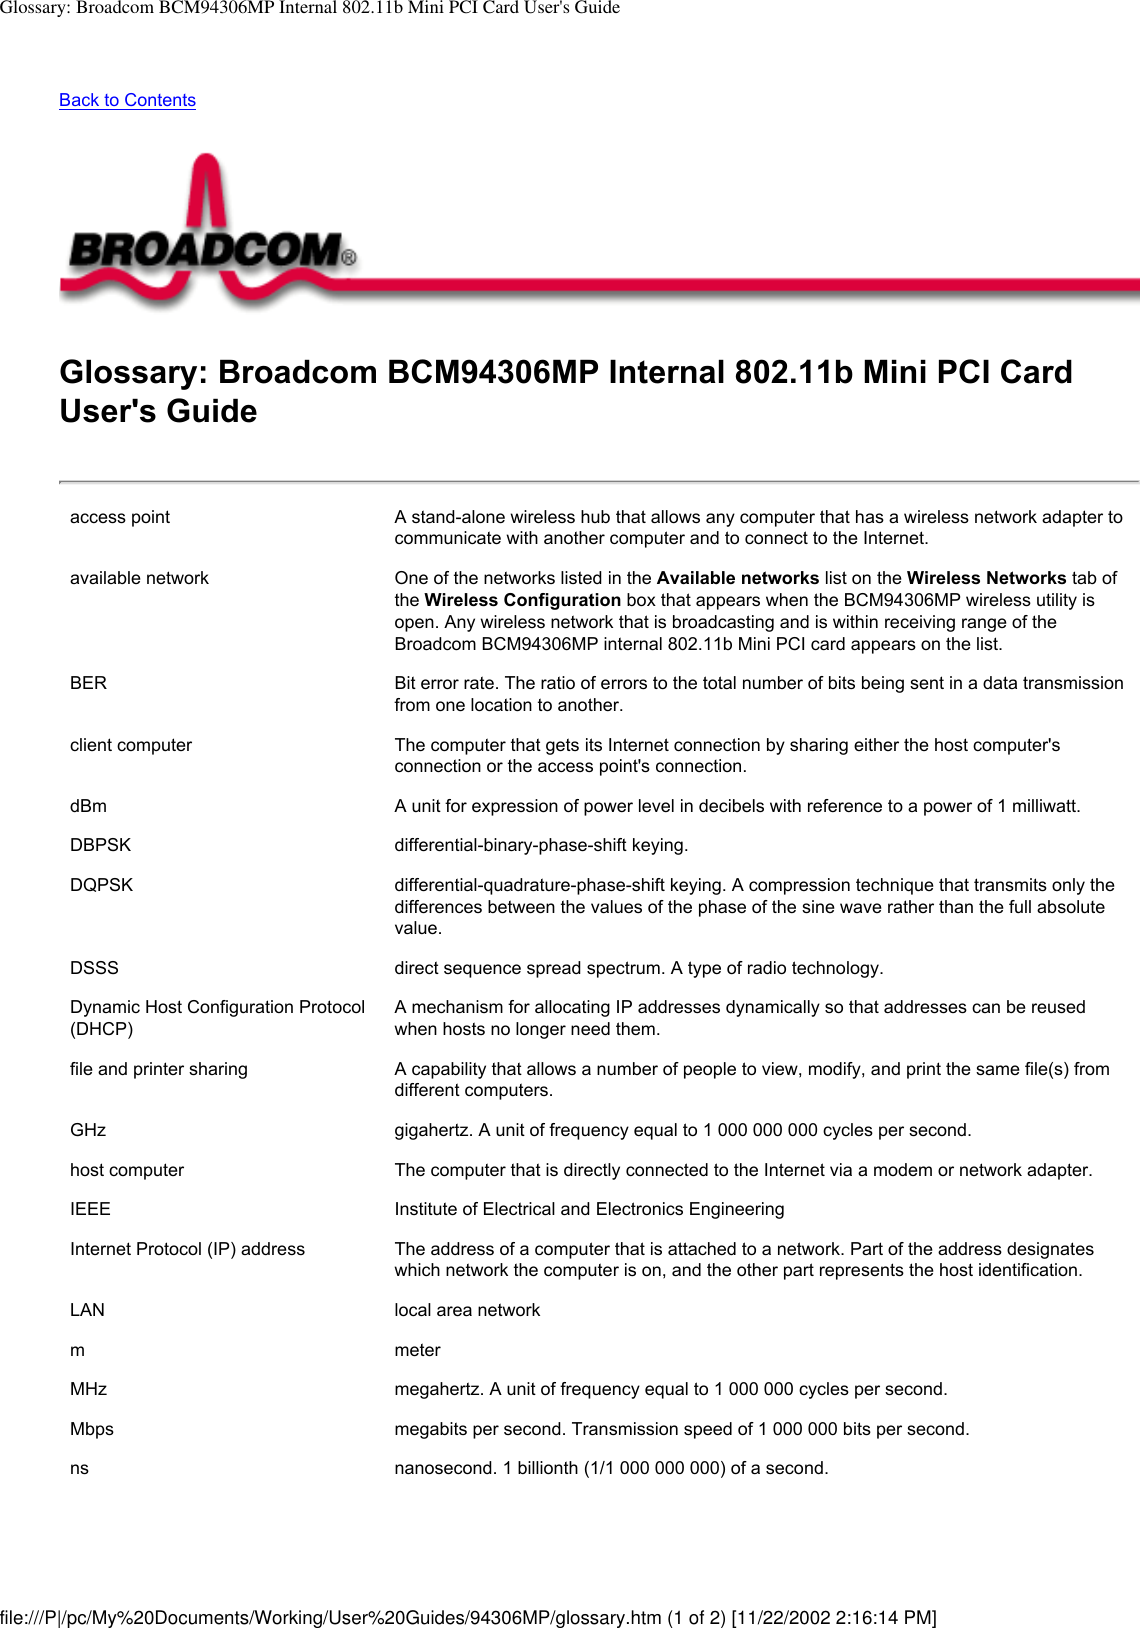 Glossary: Broadcom BCM94306MP Internal 802.11b Mini PCI Card User&apos;s GuideBack to Contents Glossary: Broadcom BCM94306MP Internal 802.11b Mini PCI Card User&apos;s Guideaccess point A stand-alone wireless hub that allows any computer that has a wireless network adapter to communicate with another computer and to connect to the Internet. available network One of the networks listed in the Available networks list on the Wireless Networks tab of the Wireless Configuration box that appears when the BCM94306MP wireless utility is open. Any wireless network that is broadcasting and is within receiving range of the Broadcom BCM94306MP internal 802.11b Mini PCI card appears on the list.BER Bit error rate. The ratio of errors to the total number of bits being sent in a data transmission from one location to another.client computer The computer that gets its Internet connection by sharing either the host computer&apos;s connection or the access point&apos;s connection.dBm A unit for expression of power level in decibels with reference to a power of 1 milliwatt.DBPSK differential-binary-phase-shift keying.DQPSK differential-quadrature-phase-shift keying. A compression technique that transmits only the differences between the values of the phase of the sine wave rather than the full absolute value.DSSS direct sequence spread spectrum. A type of radio technology.Dynamic Host Configuration Protocol (DHCP) A mechanism for allocating IP addresses dynamically so that addresses can be reused when hosts no longer need them.file and printer sharing A capability that allows a number of people to view, modify, and print the same file(s) from different computers.GHz gigahertz. A unit of frequency equal to 1 000 000 000 cycles per second. host computer The computer that is directly connected to the Internet via a modem or network adapter.IEEE Institute of Electrical and Electronics EngineeringInternet Protocol (IP) address The address of a computer that is attached to a network. Part of the address designates which network the computer is on, and the other part represents the host identification.LAN local area networkm meterMHz megahertz. A unit of frequency equal to 1 000 000 cycles per second.Mbps megabits per second. Transmission speed of 1 000 000 bits per second.ns nanosecond. 1 billionth (1/1 000 000 000) of a second.file:///P|/pc/My%20Documents/Working/User%20Guides/94306MP/glossary.htm (1 of 2) [11/22/2002 2:16:14 PM]